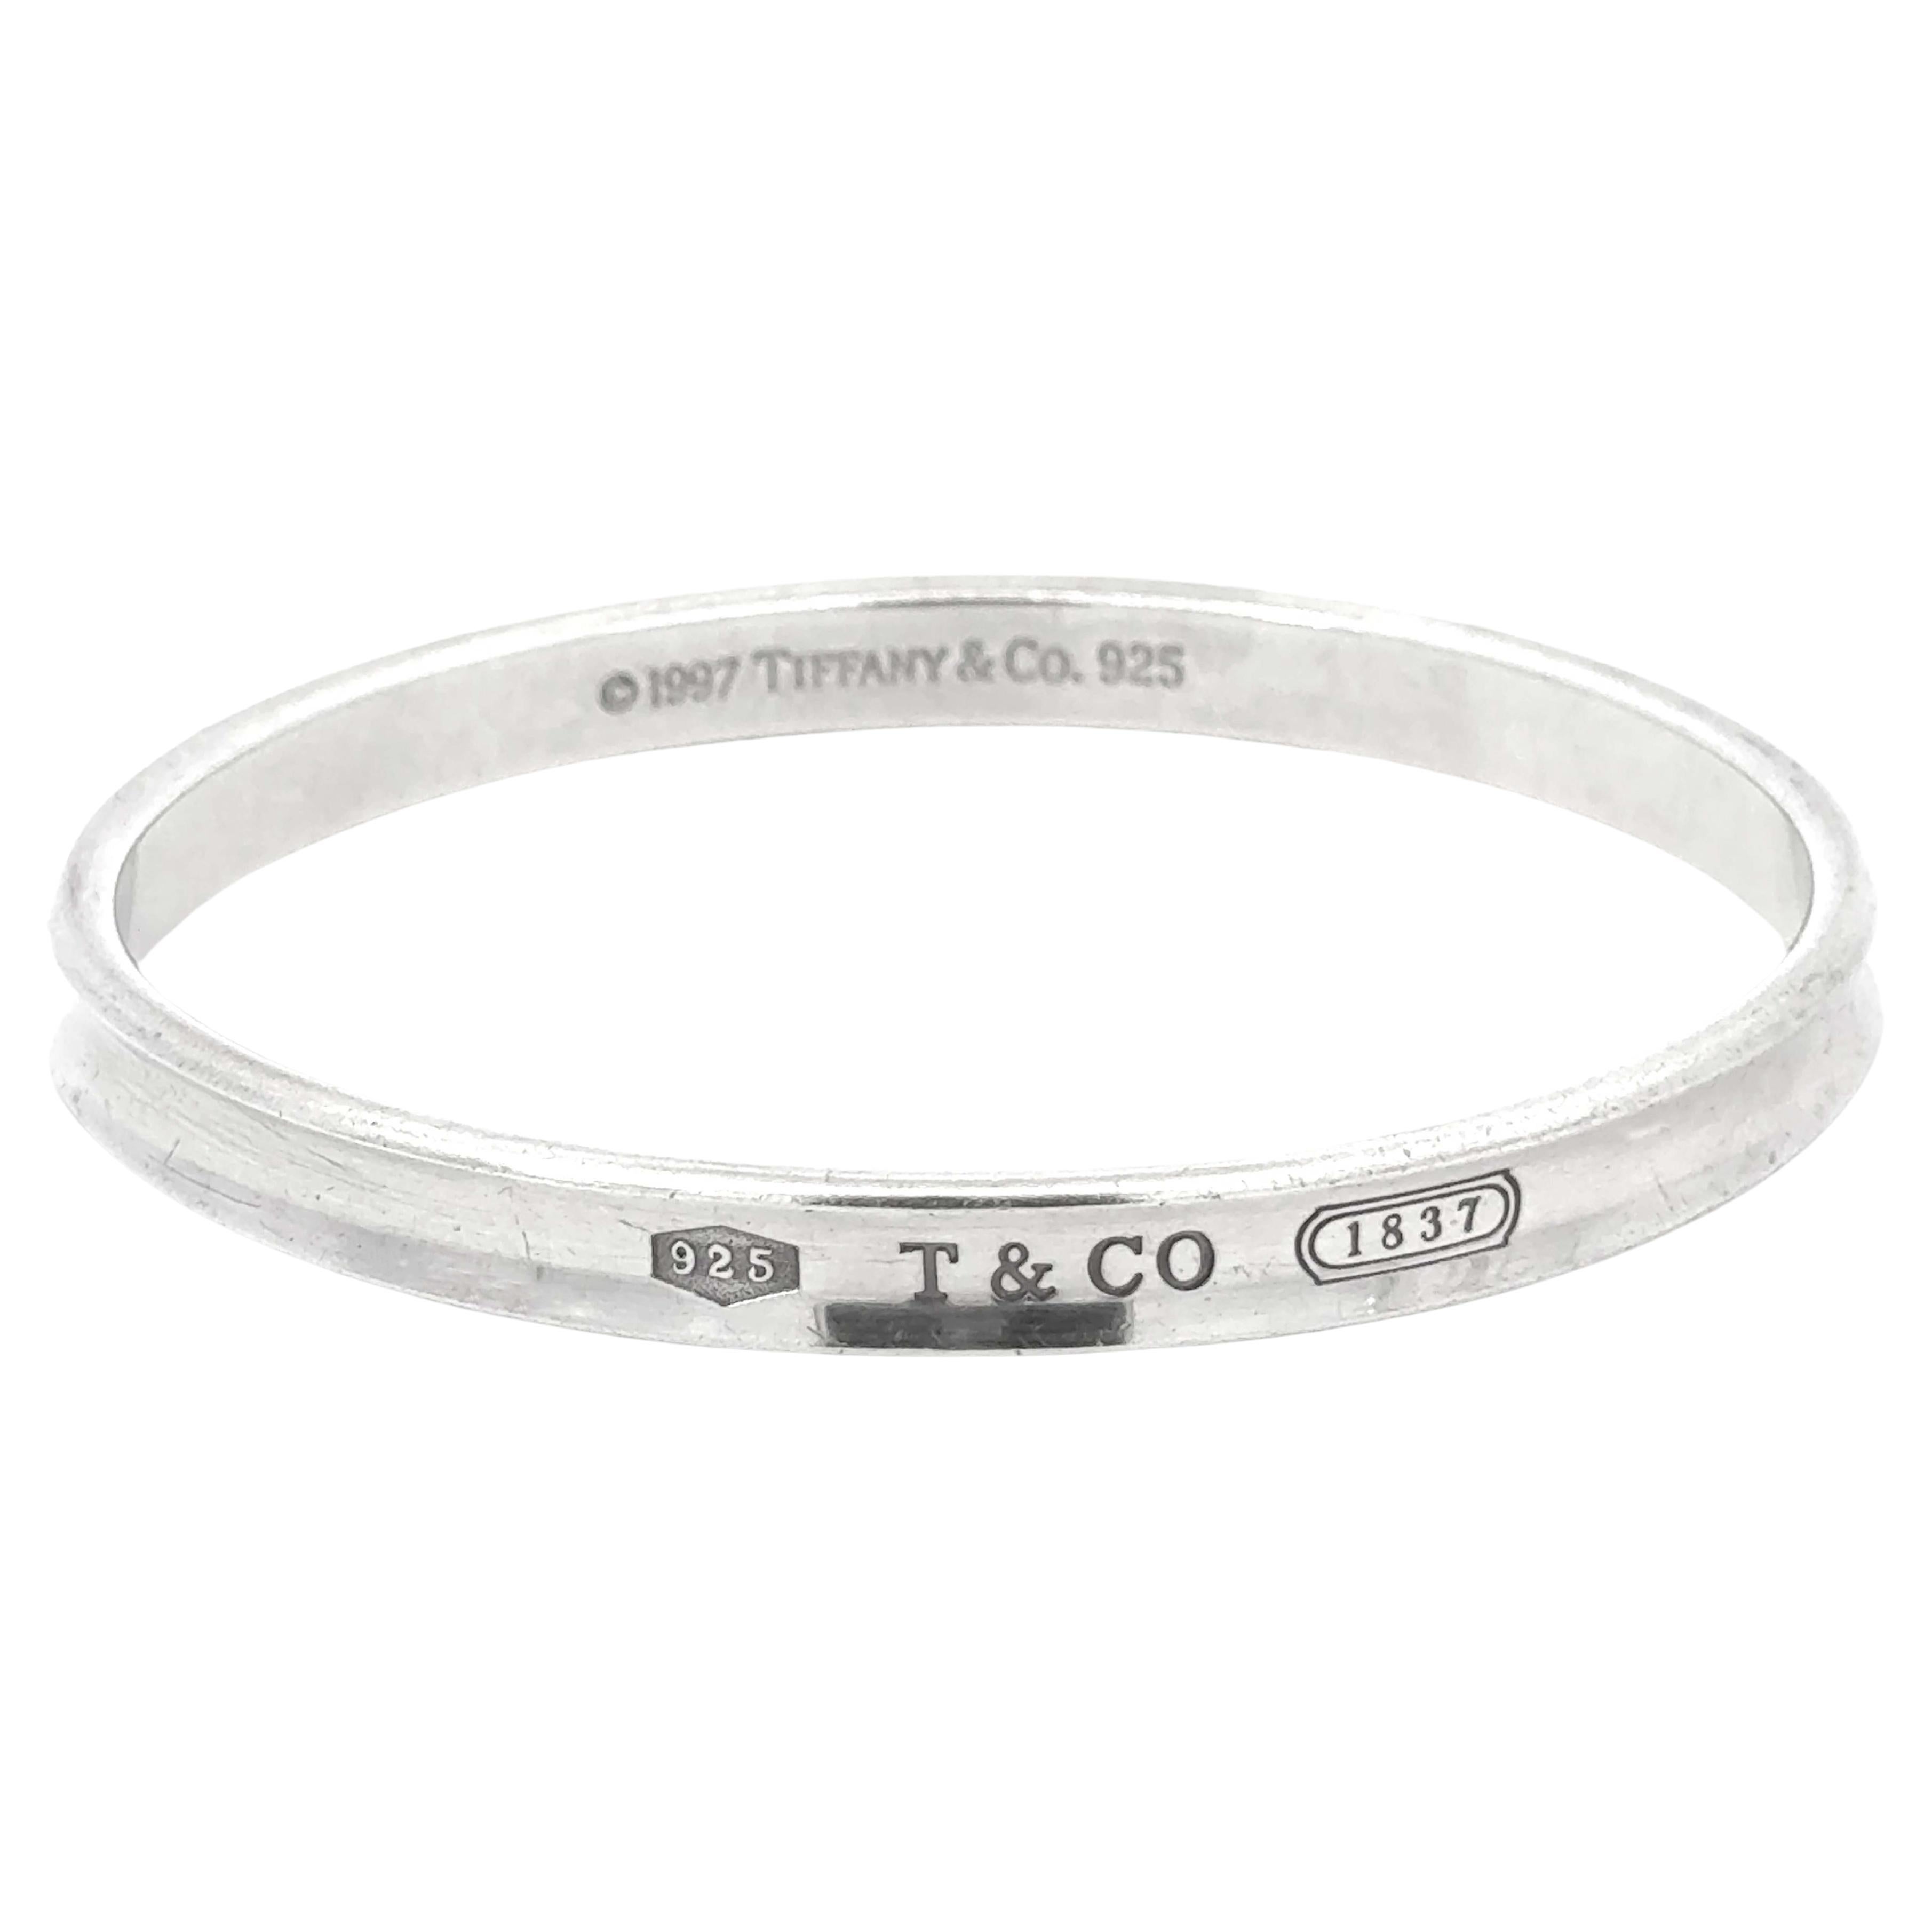 Tiffany & Co. 1837 Sterling Silver Bangle For Sale